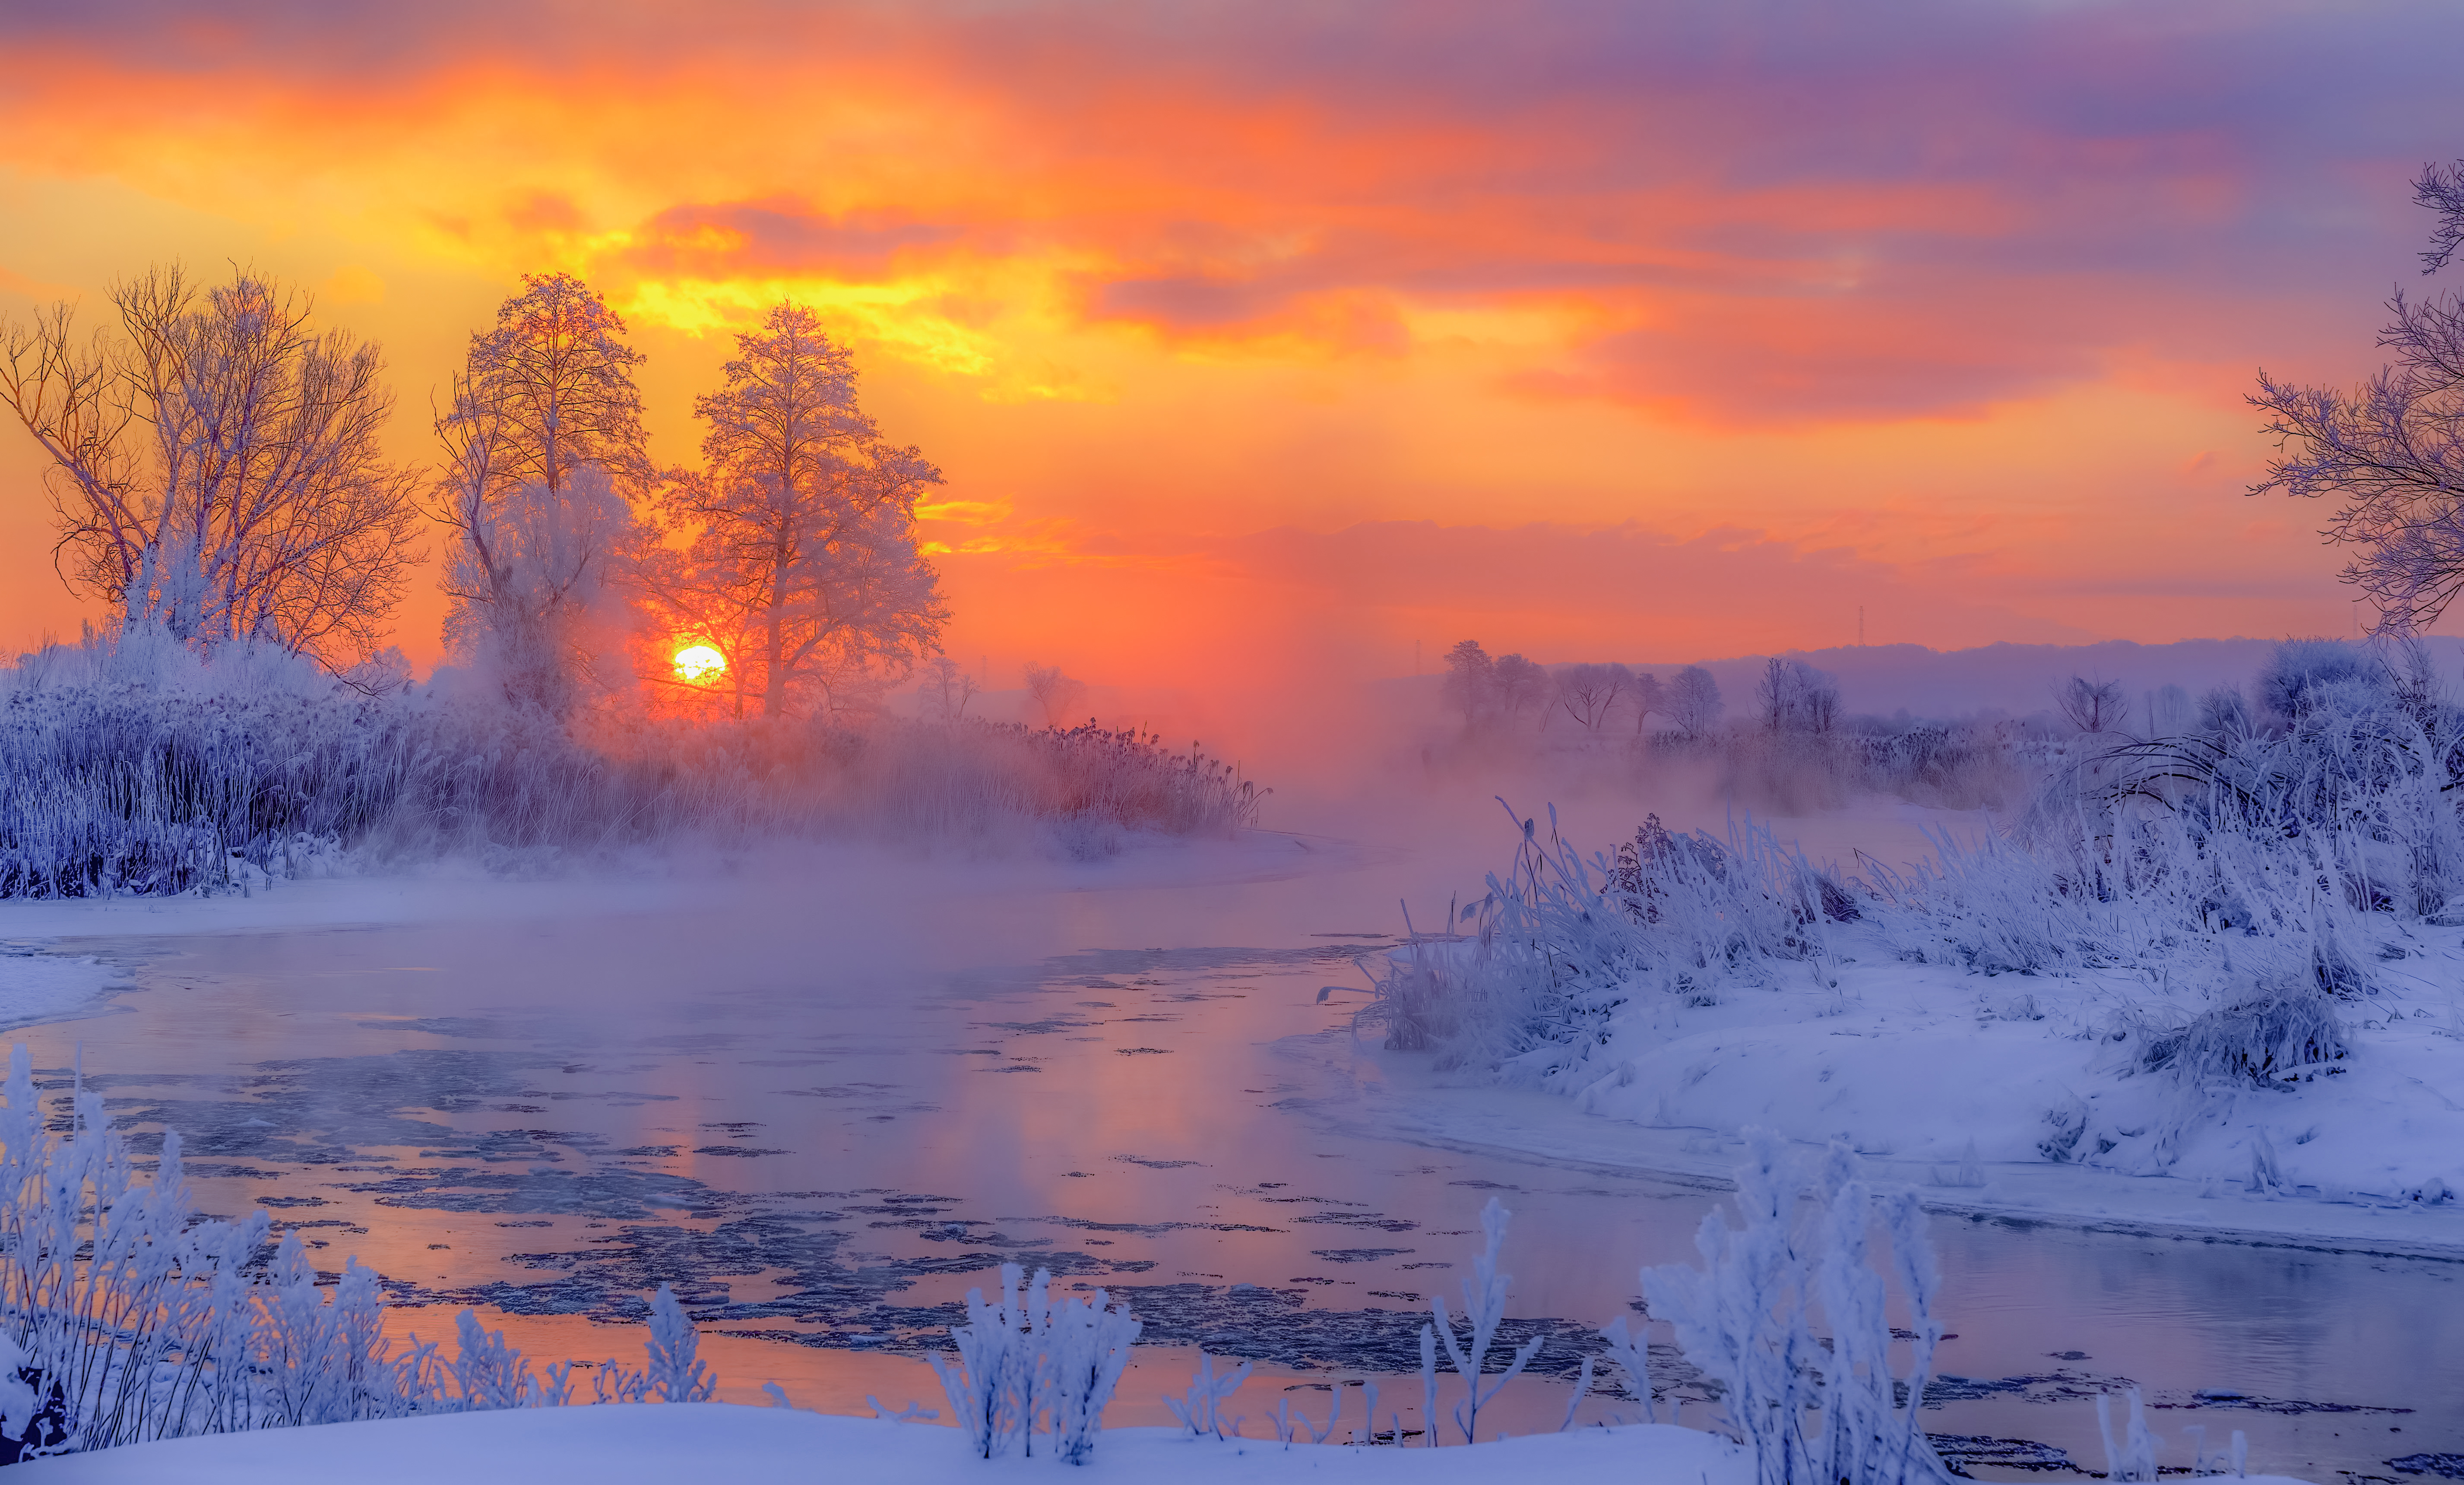 Krzysztof Tollas - Frosty Winter Sunrise Over the Gwda River.